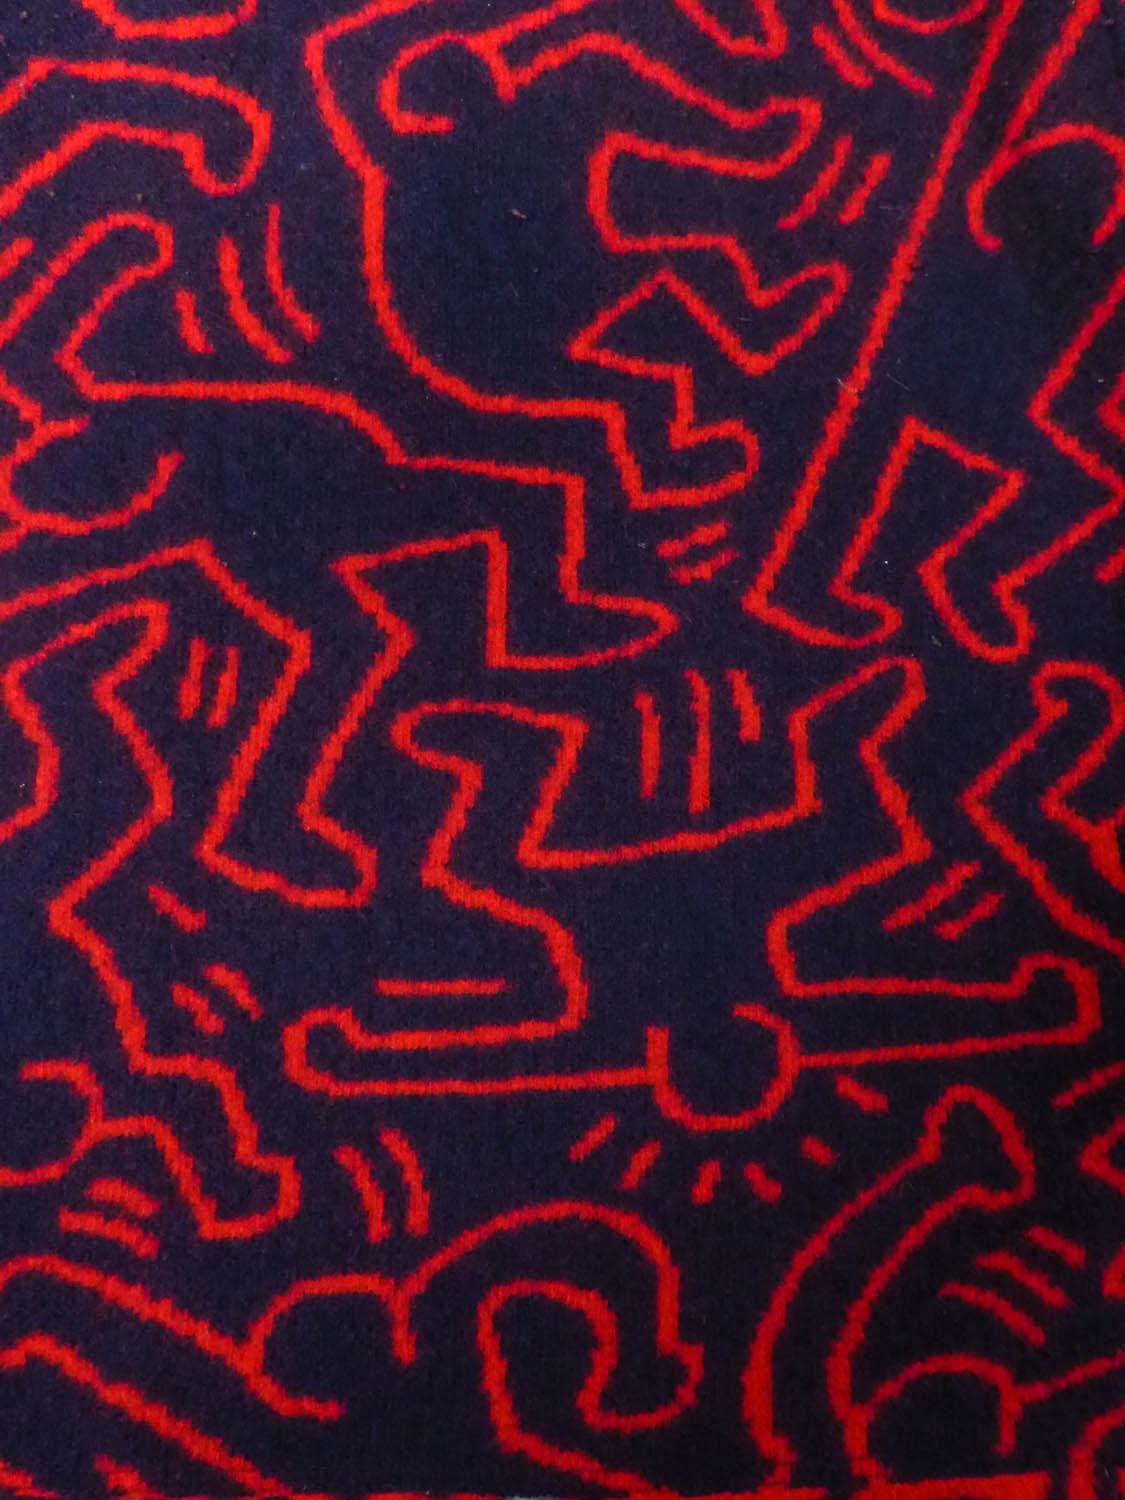 Red Keith Haring Skirt by Jean-Charles de Castelbajac Circa 1990/2000